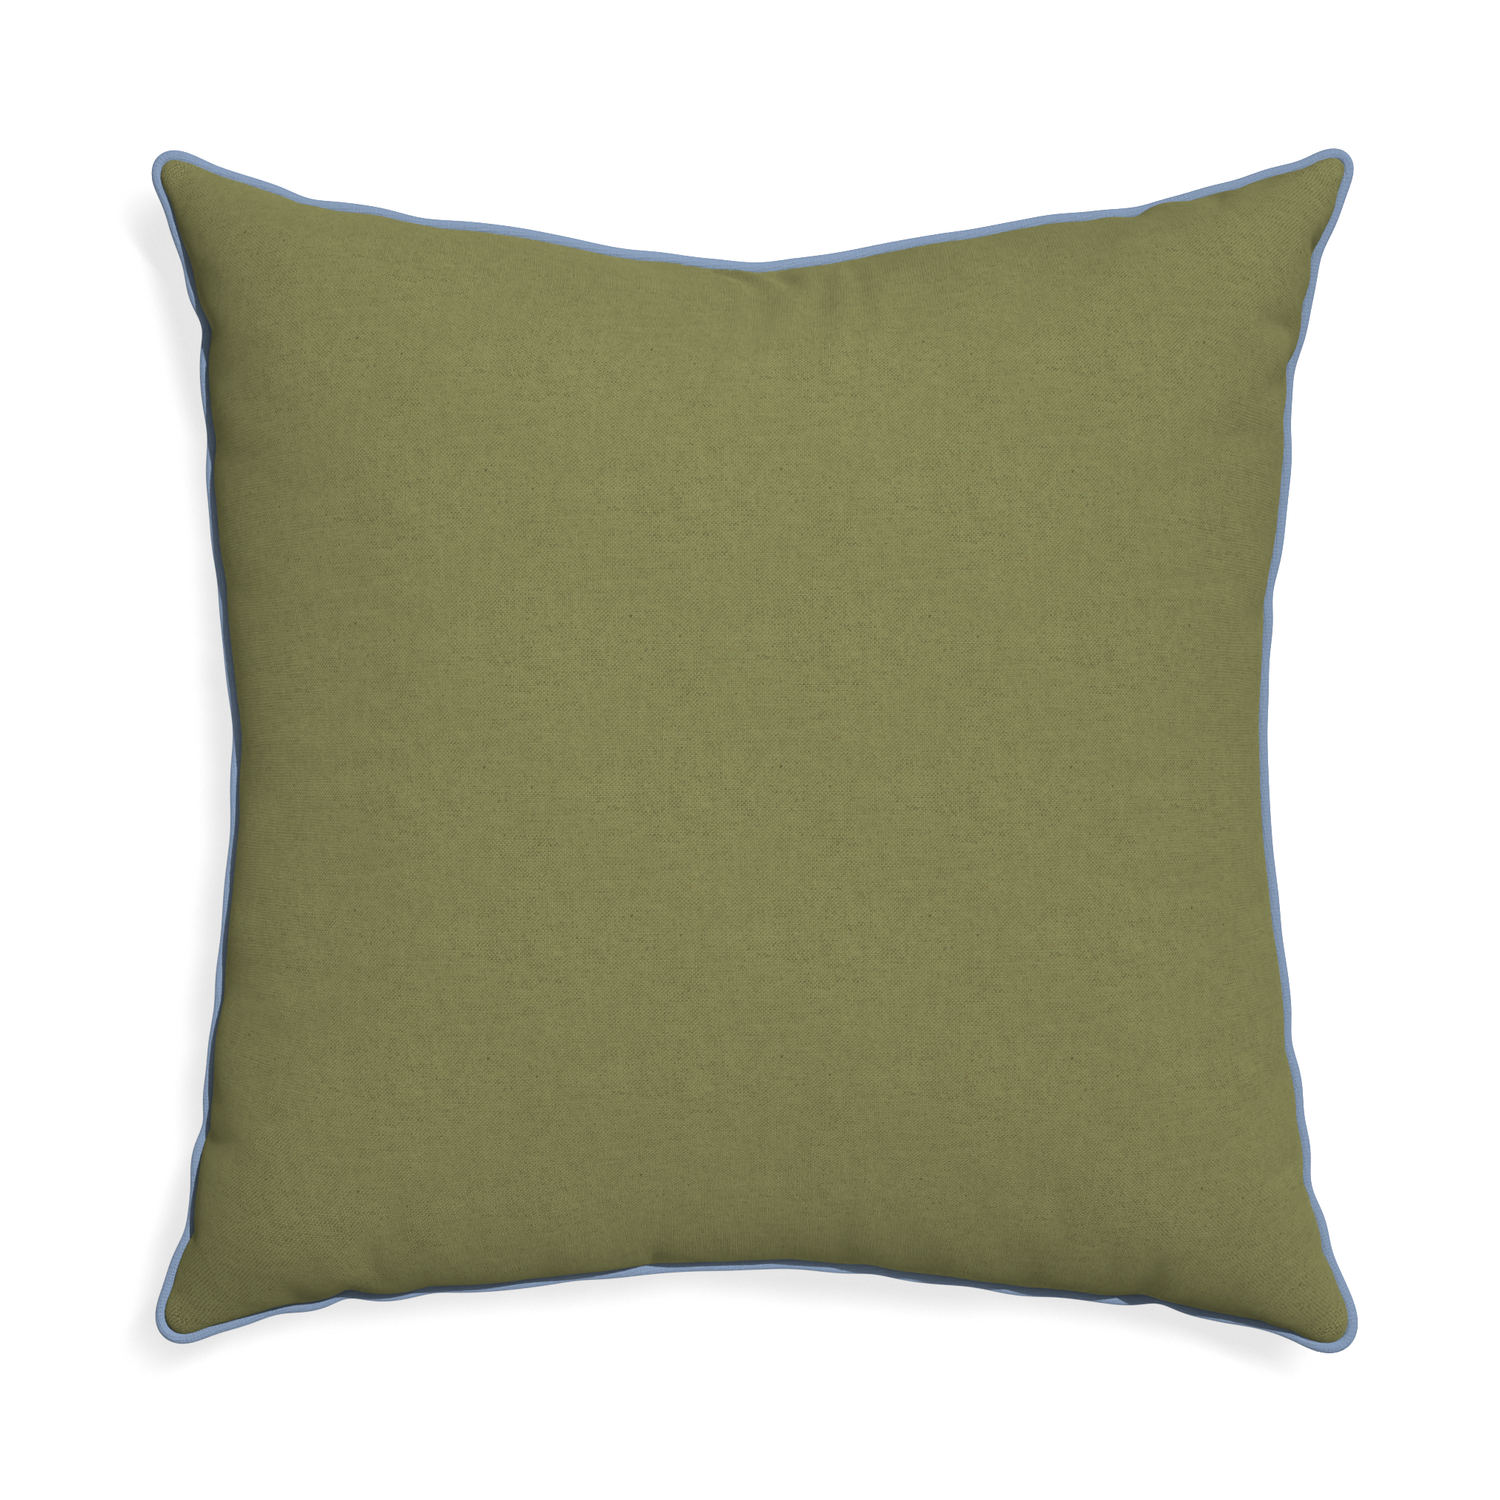 Euro-sham moss custom moss greenpillow with sky piping on white background